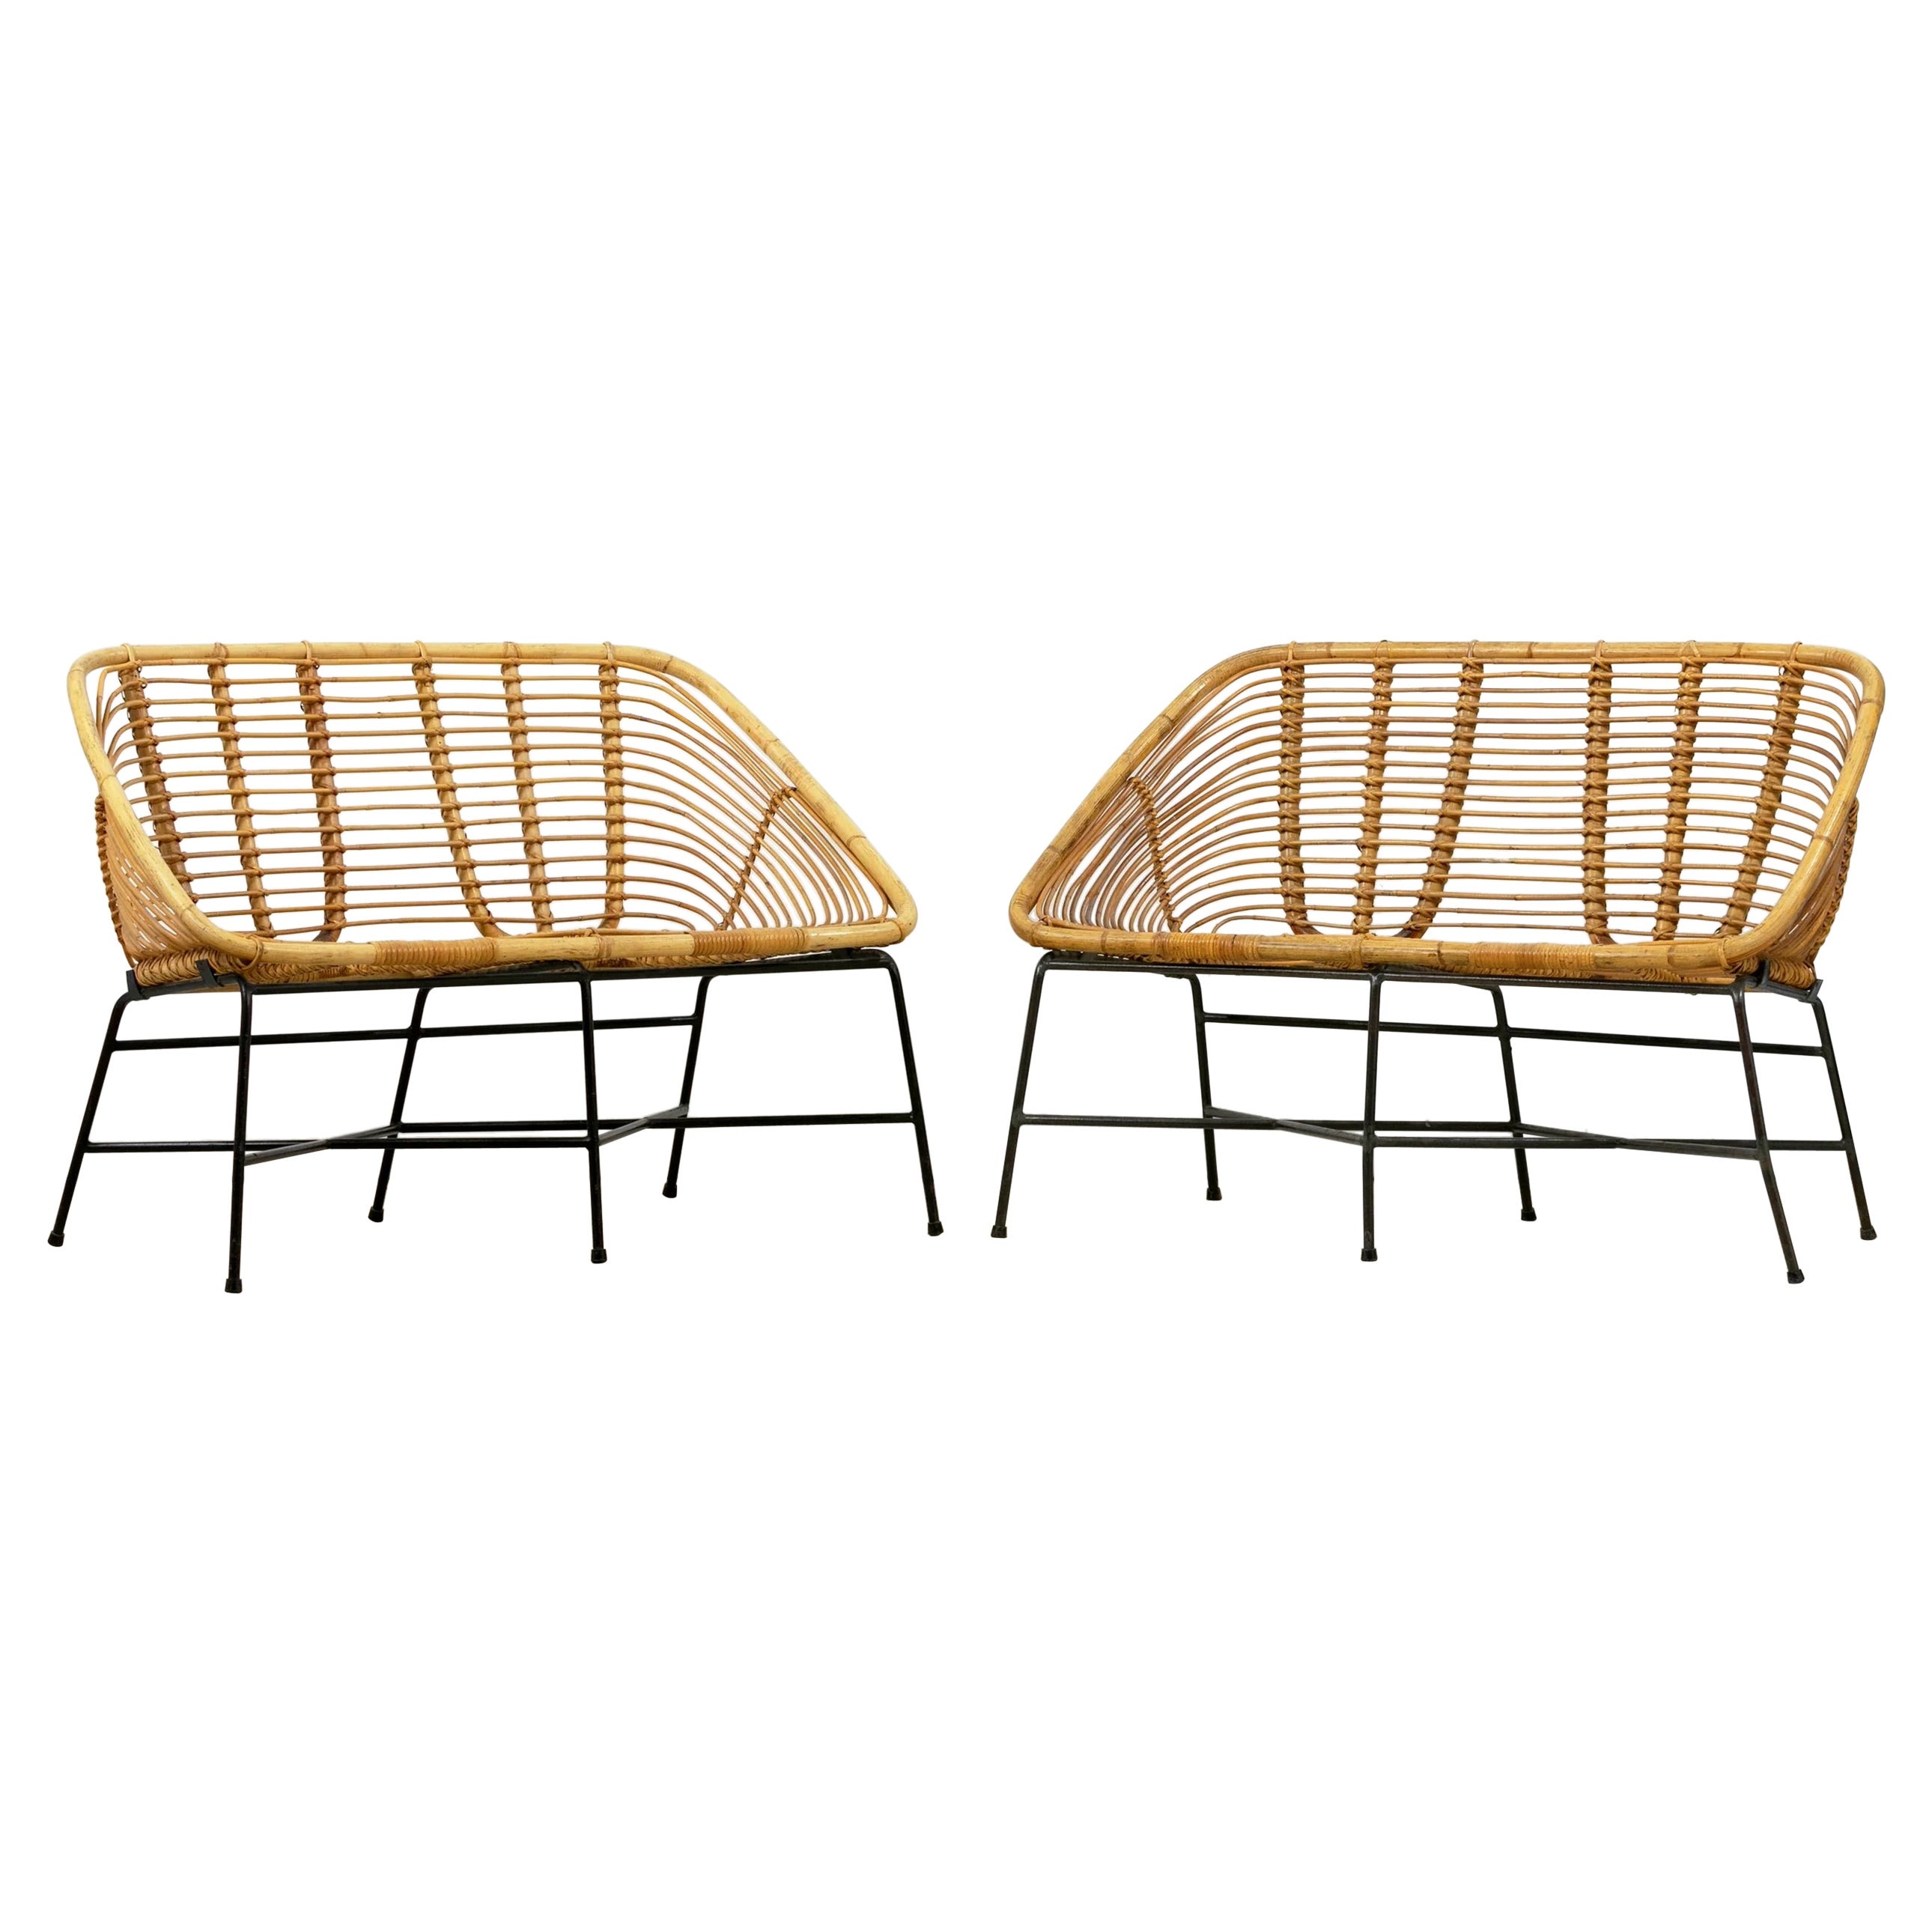 Pair of rattan and lacquered iron bench seats, France, circa 1950